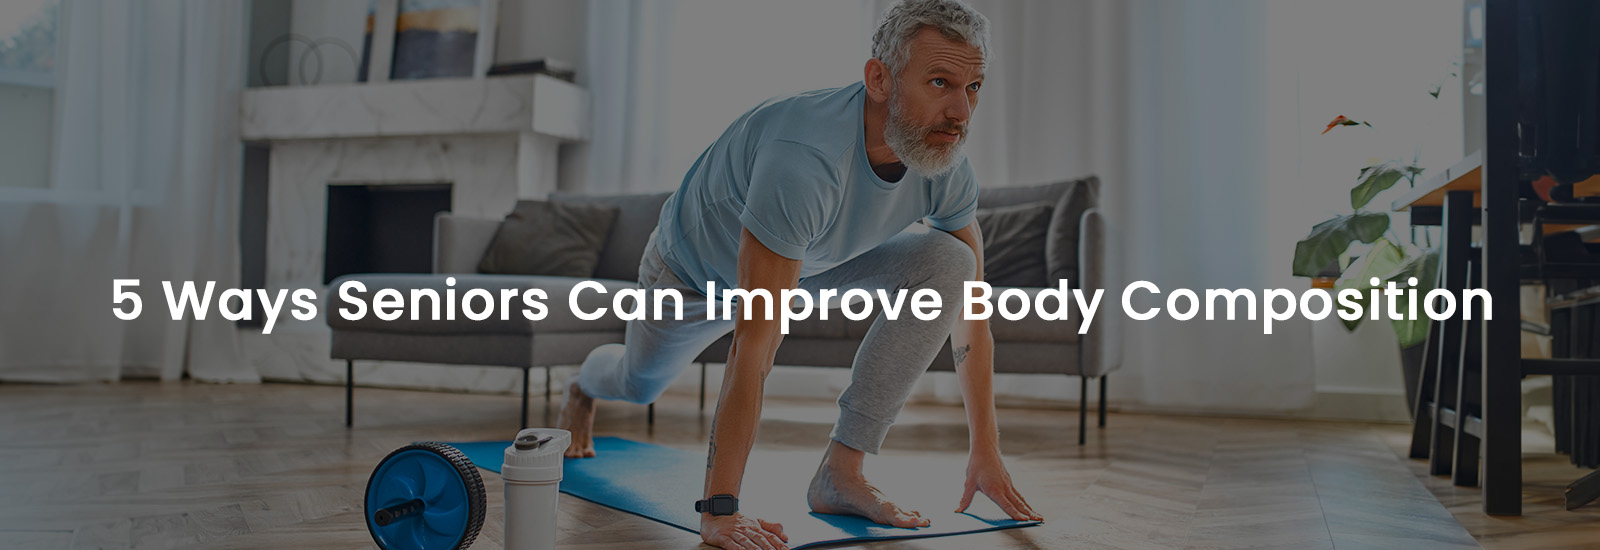 5 Ways Seniors Can Improve Body Composition | Banner Image